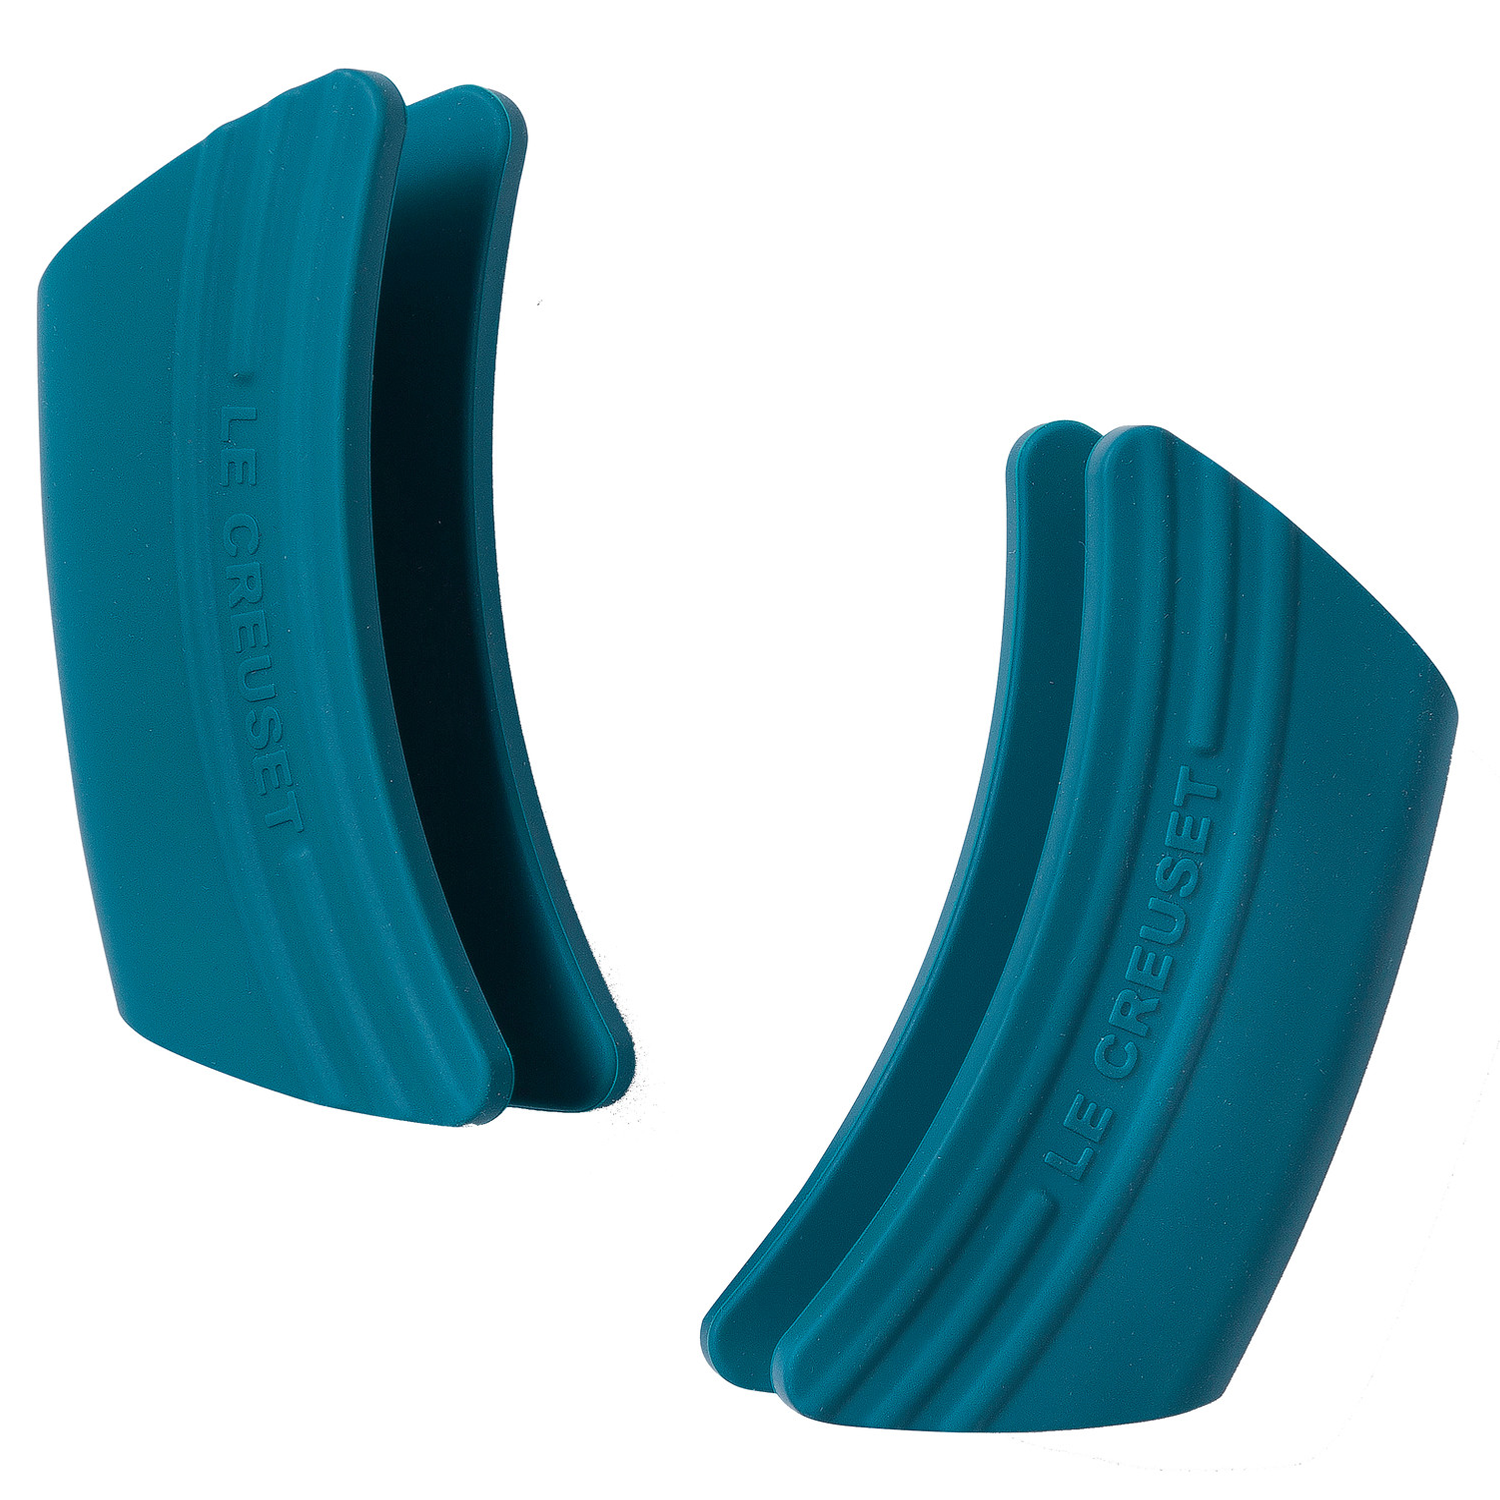 Le Creuset Silicone Set of 2 Handle Grips, 5 x 2 1/2 each, Caribbean